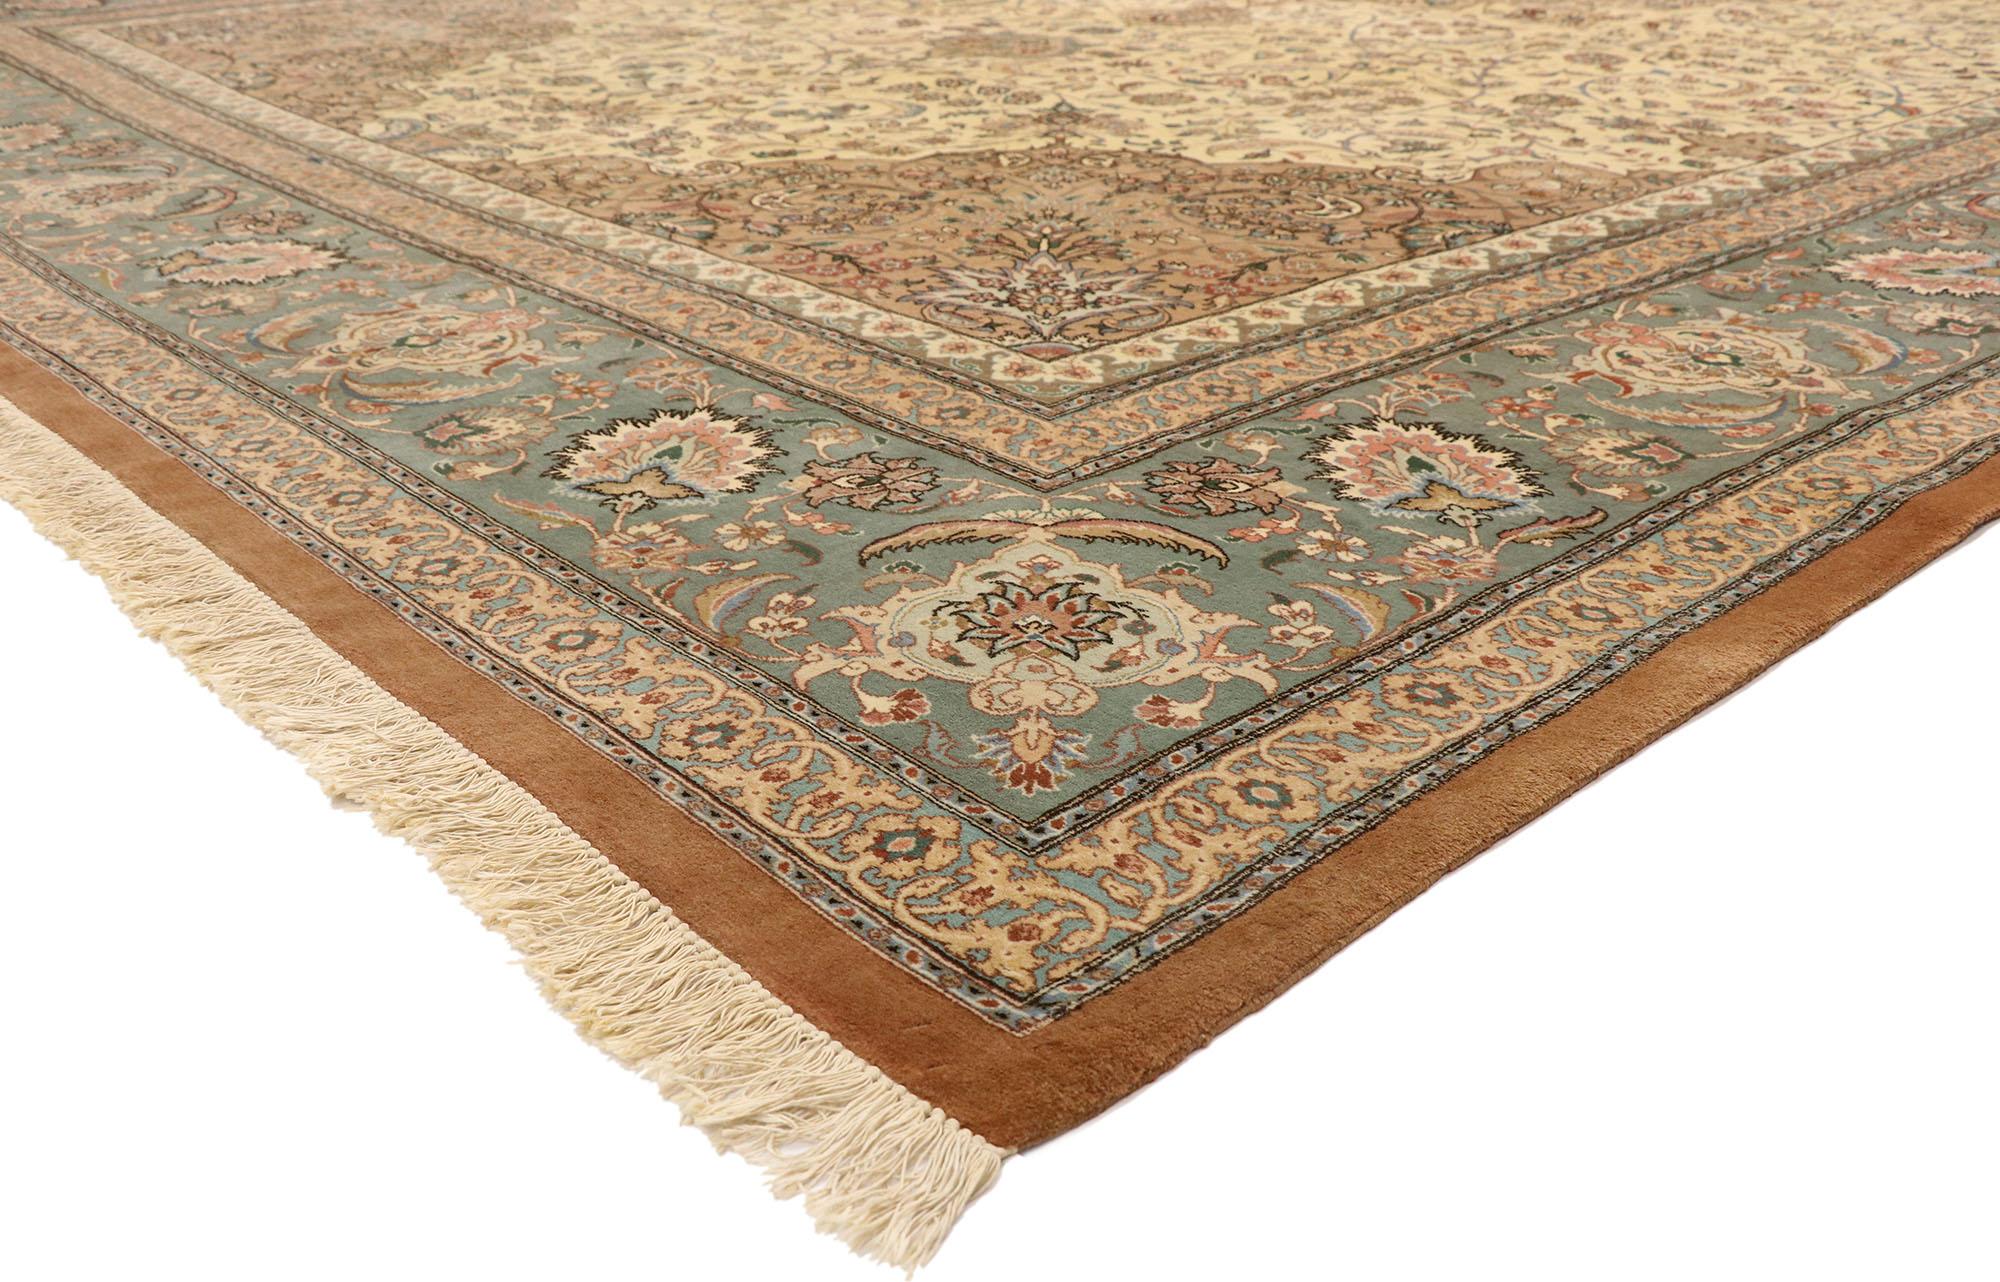 77499, vintage Persian Tabriz Palace rug with Dutch Renaissance Arabesque style. With ornate details and well-balanced symmetry combined with a dreamy color palette, this hand knotted wool vintage Persian Tabriz palace rug beautifully embodies both